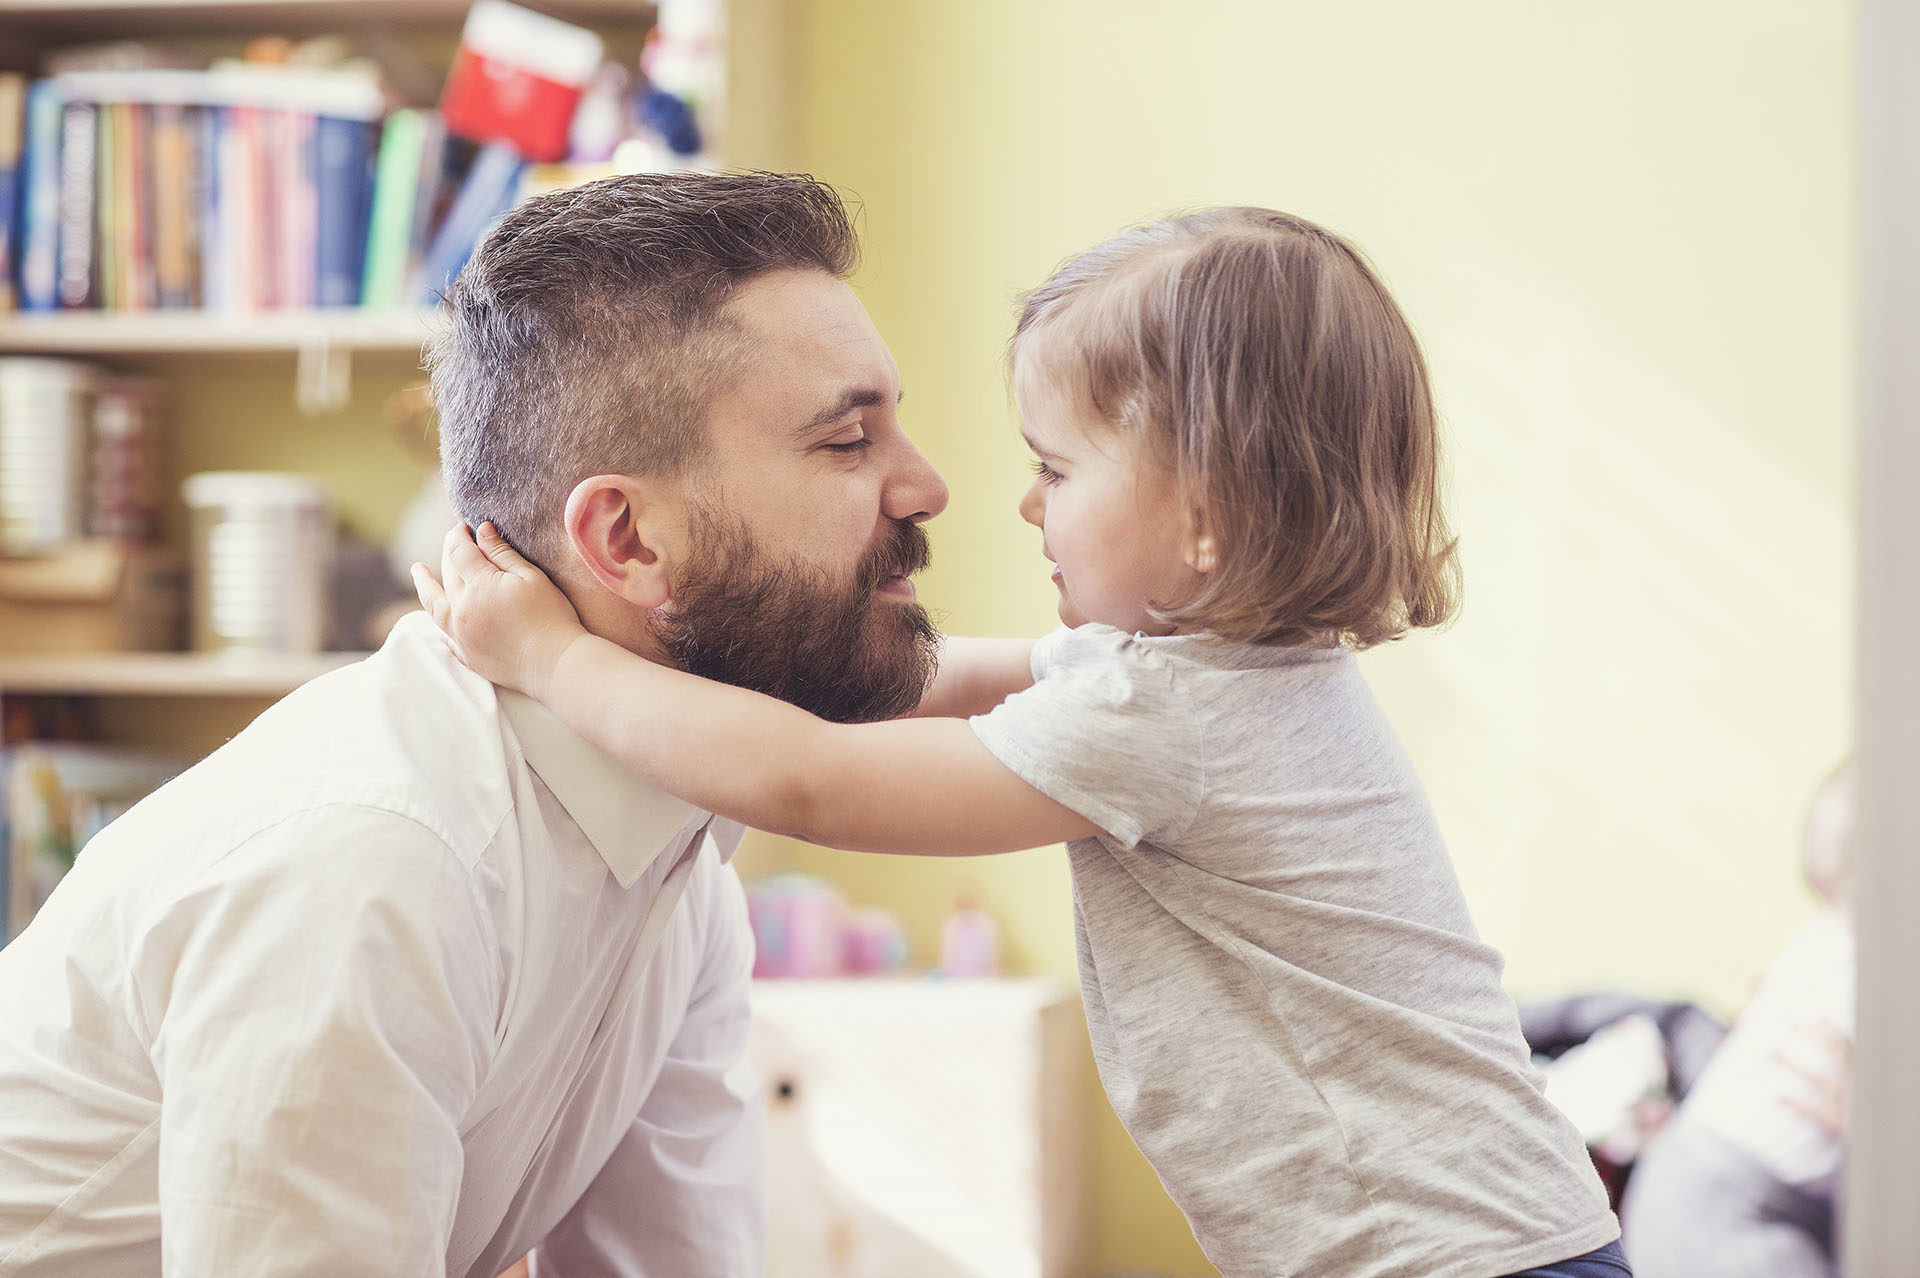 Increase in support with childcare costs needed for working parents